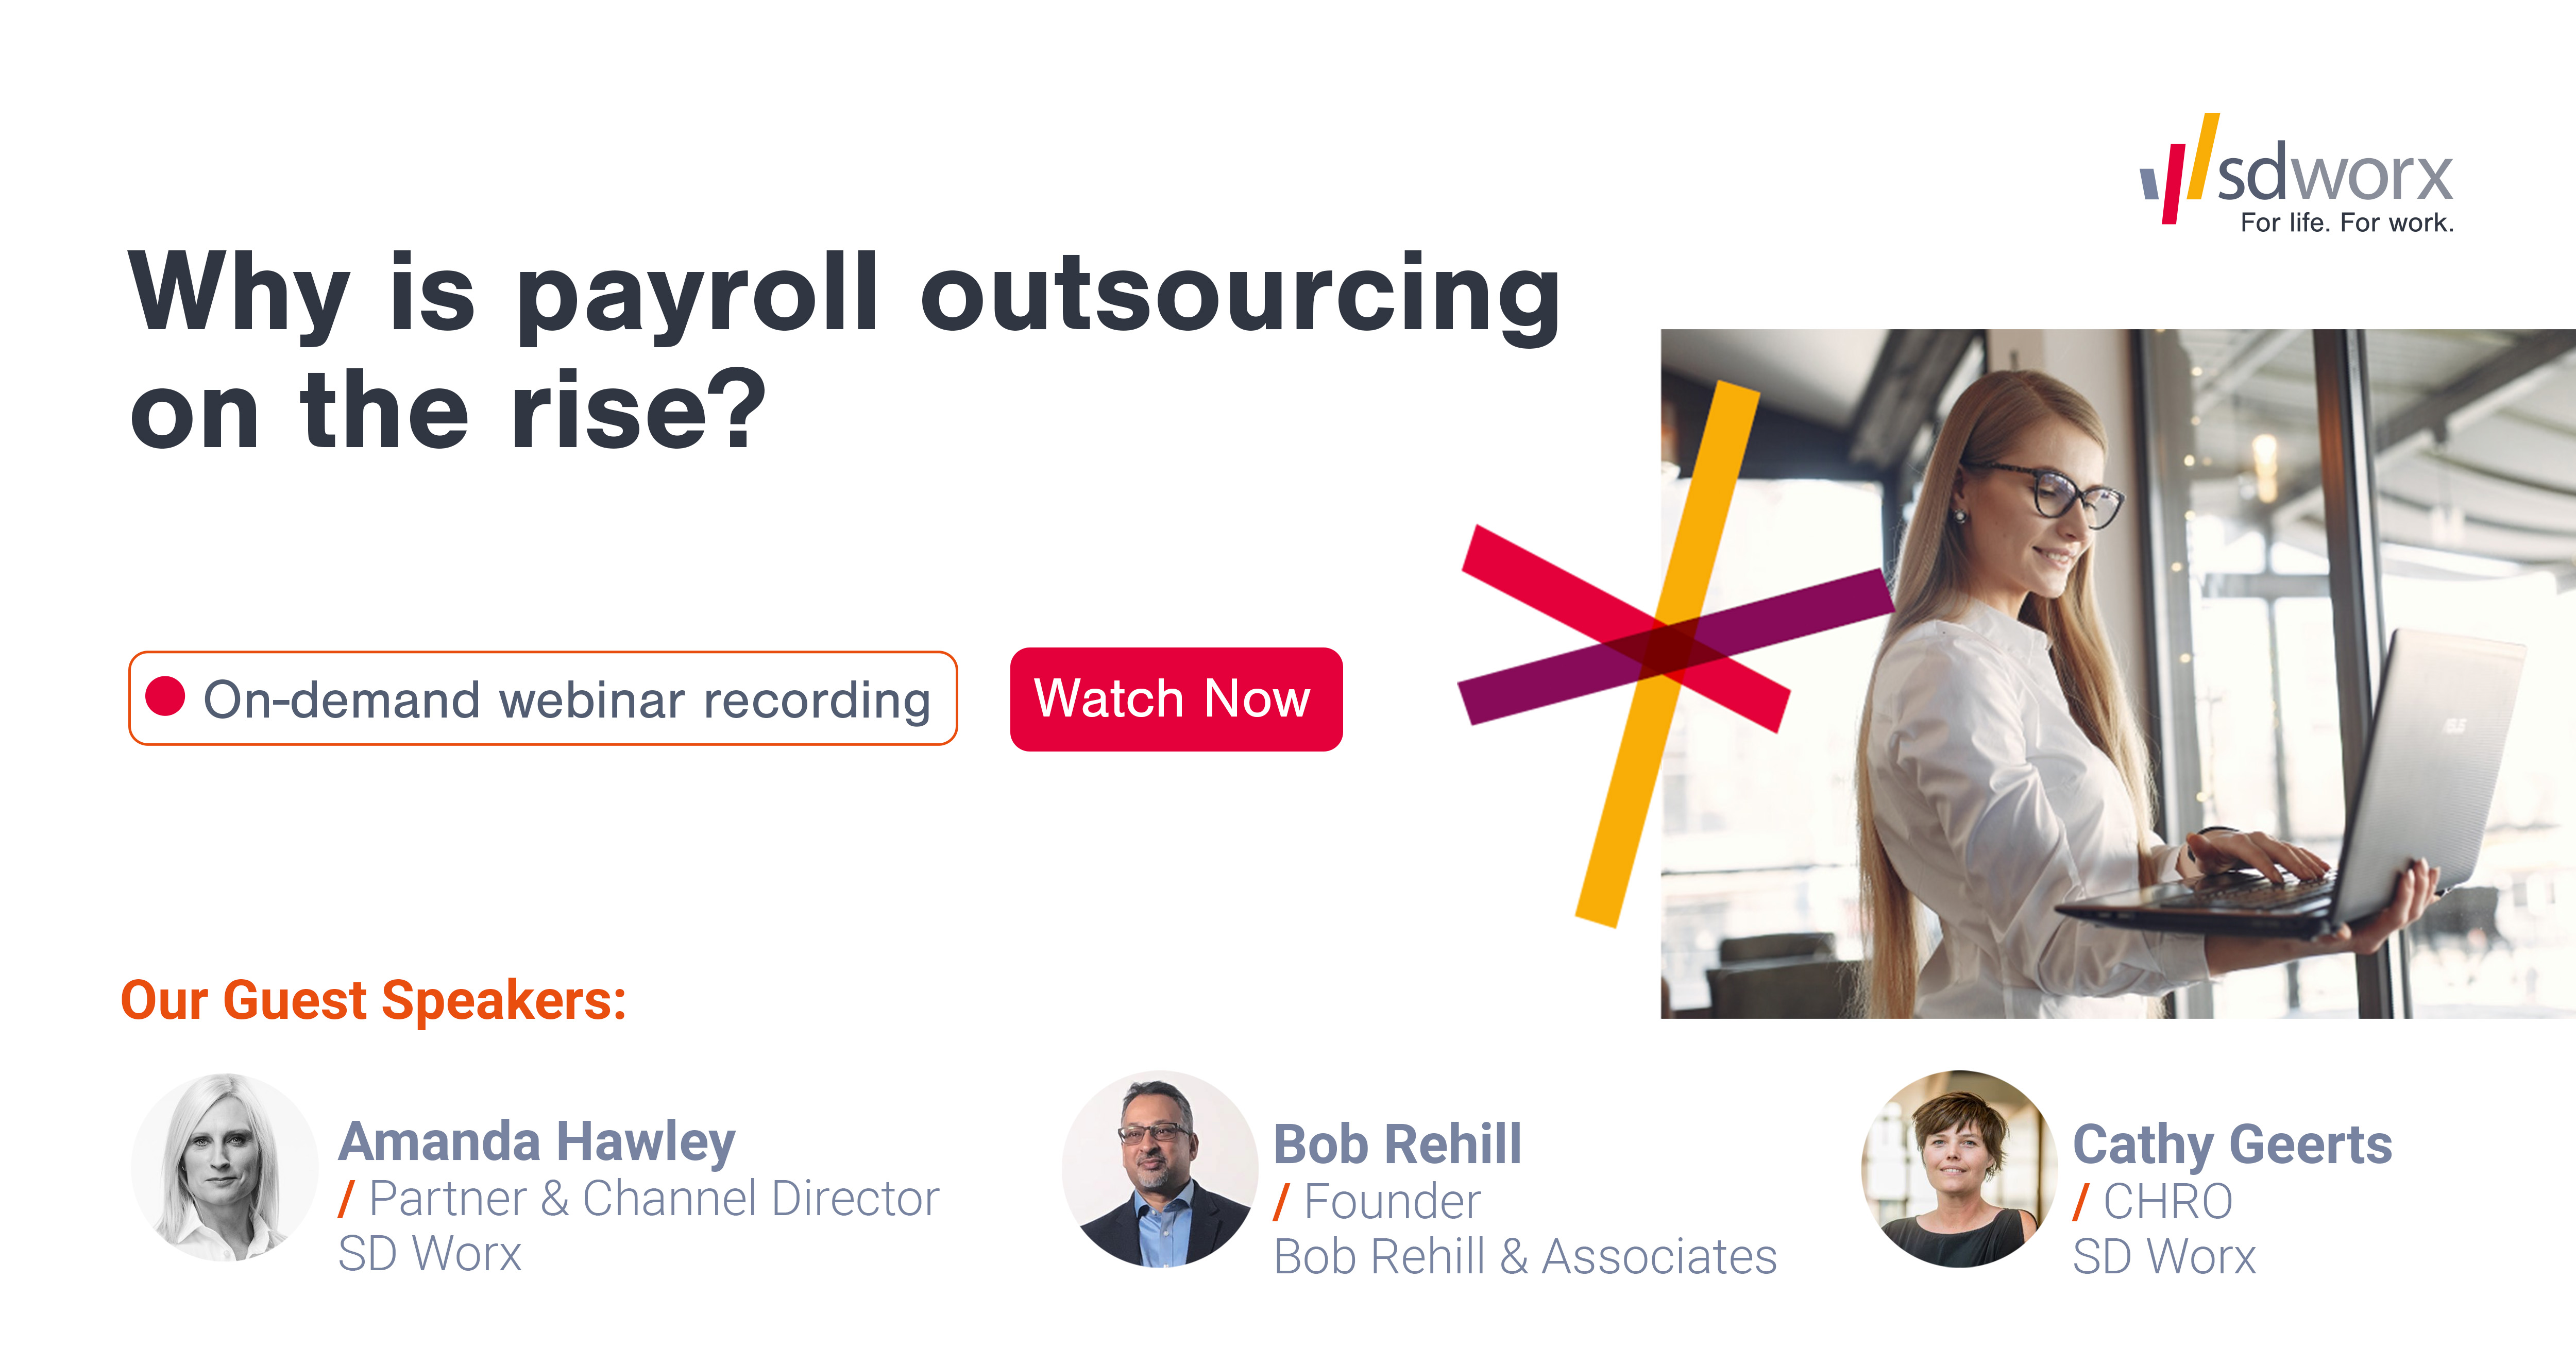 Why is payroll outsourcing on the rise?